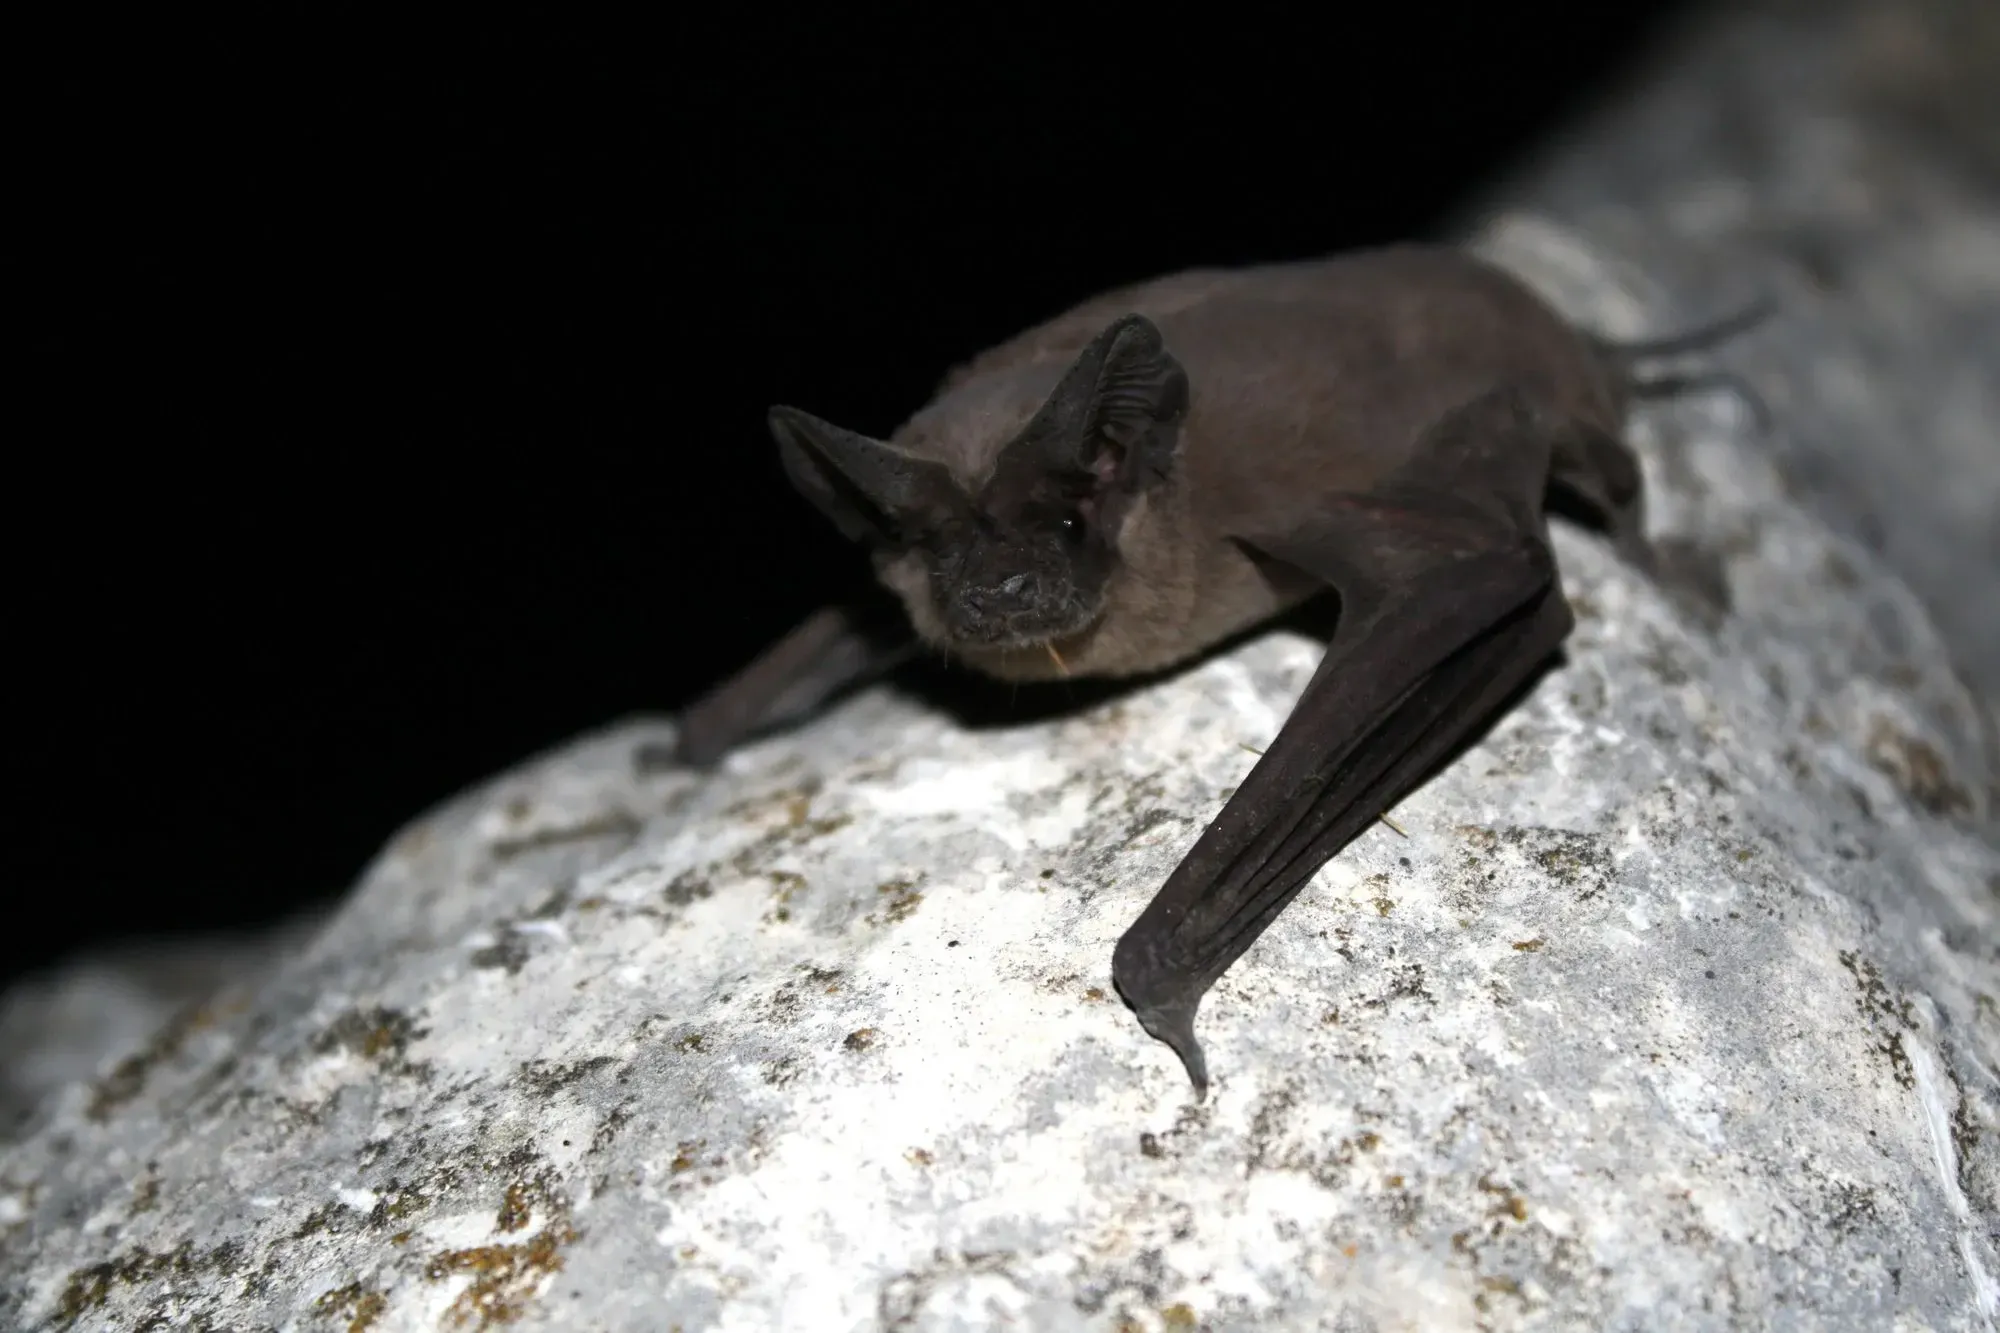 Western mastiff bat facts help to learn about new species.